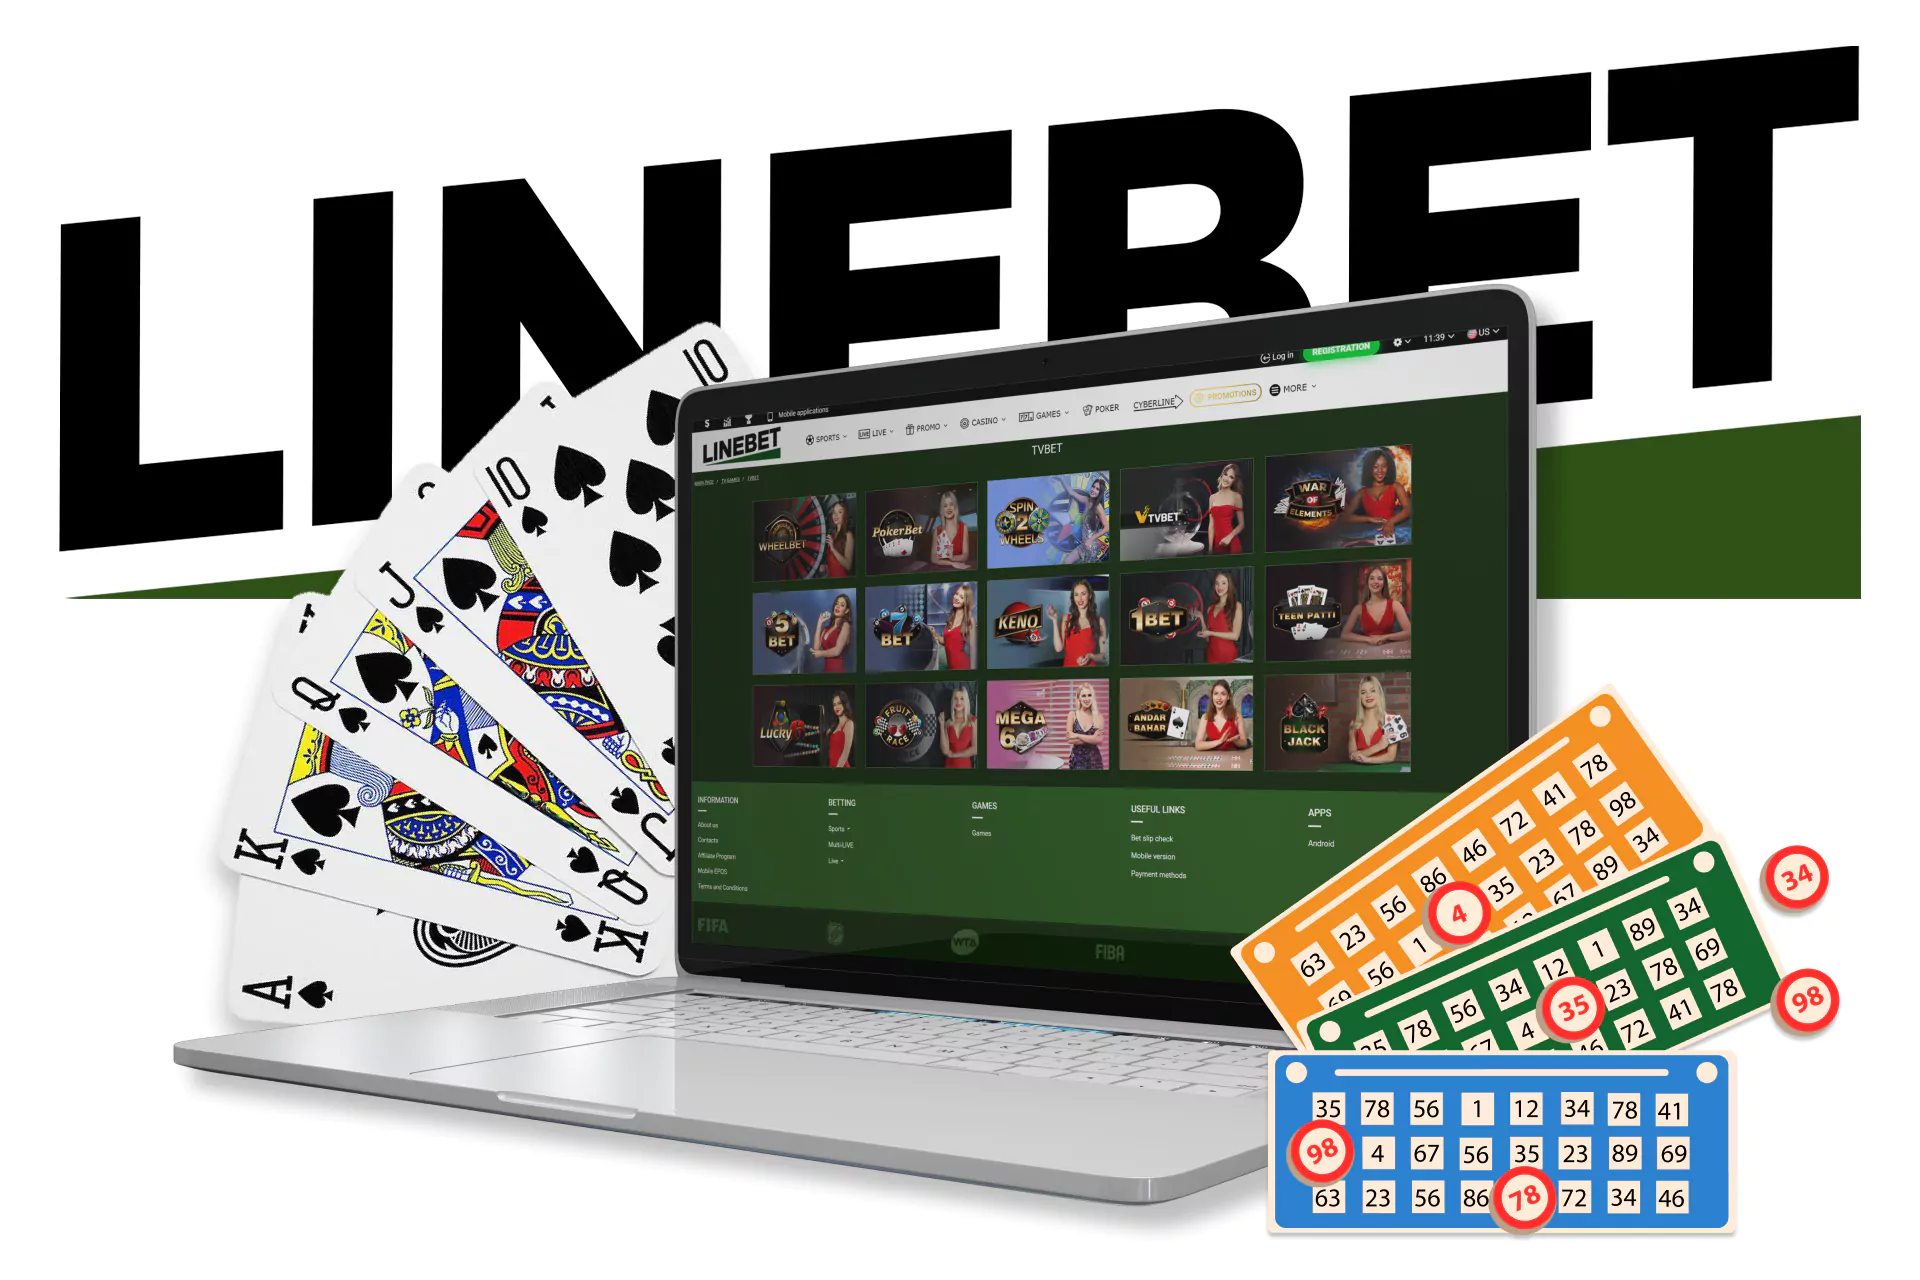 In TV games from Linebet, play games live with dealers.